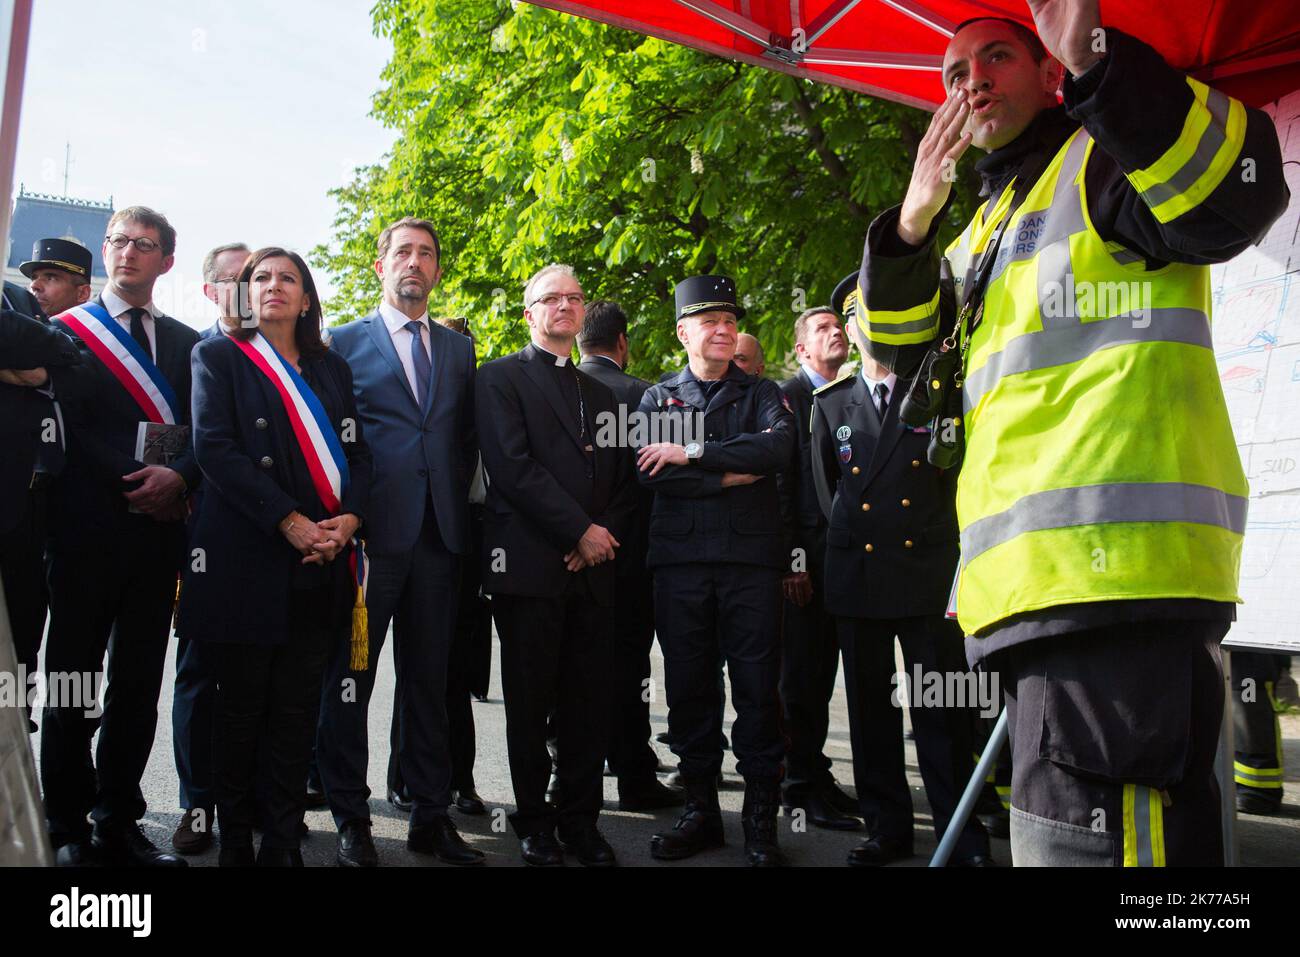 Jean-Claude Gallet General of the fire fighters of paris, Jean-Marc Chauve, French Interior Minister Christophe Castaner, Paris prefect Didier Lallement, Paris mayor Anne Hidalgo, and other officials walk by Notre Dame cathedral on April 18, 2019 in Paris. France paid a daylong tribute on April 18, 2019 to the Paris firefighters who saved Notre Dame Cathedral from collapse, while construction workers rushed to secure an area above one of the church's famed rose-shaped windows and other vulnerable sections of the fire-damaged landmark.   Stock Photo